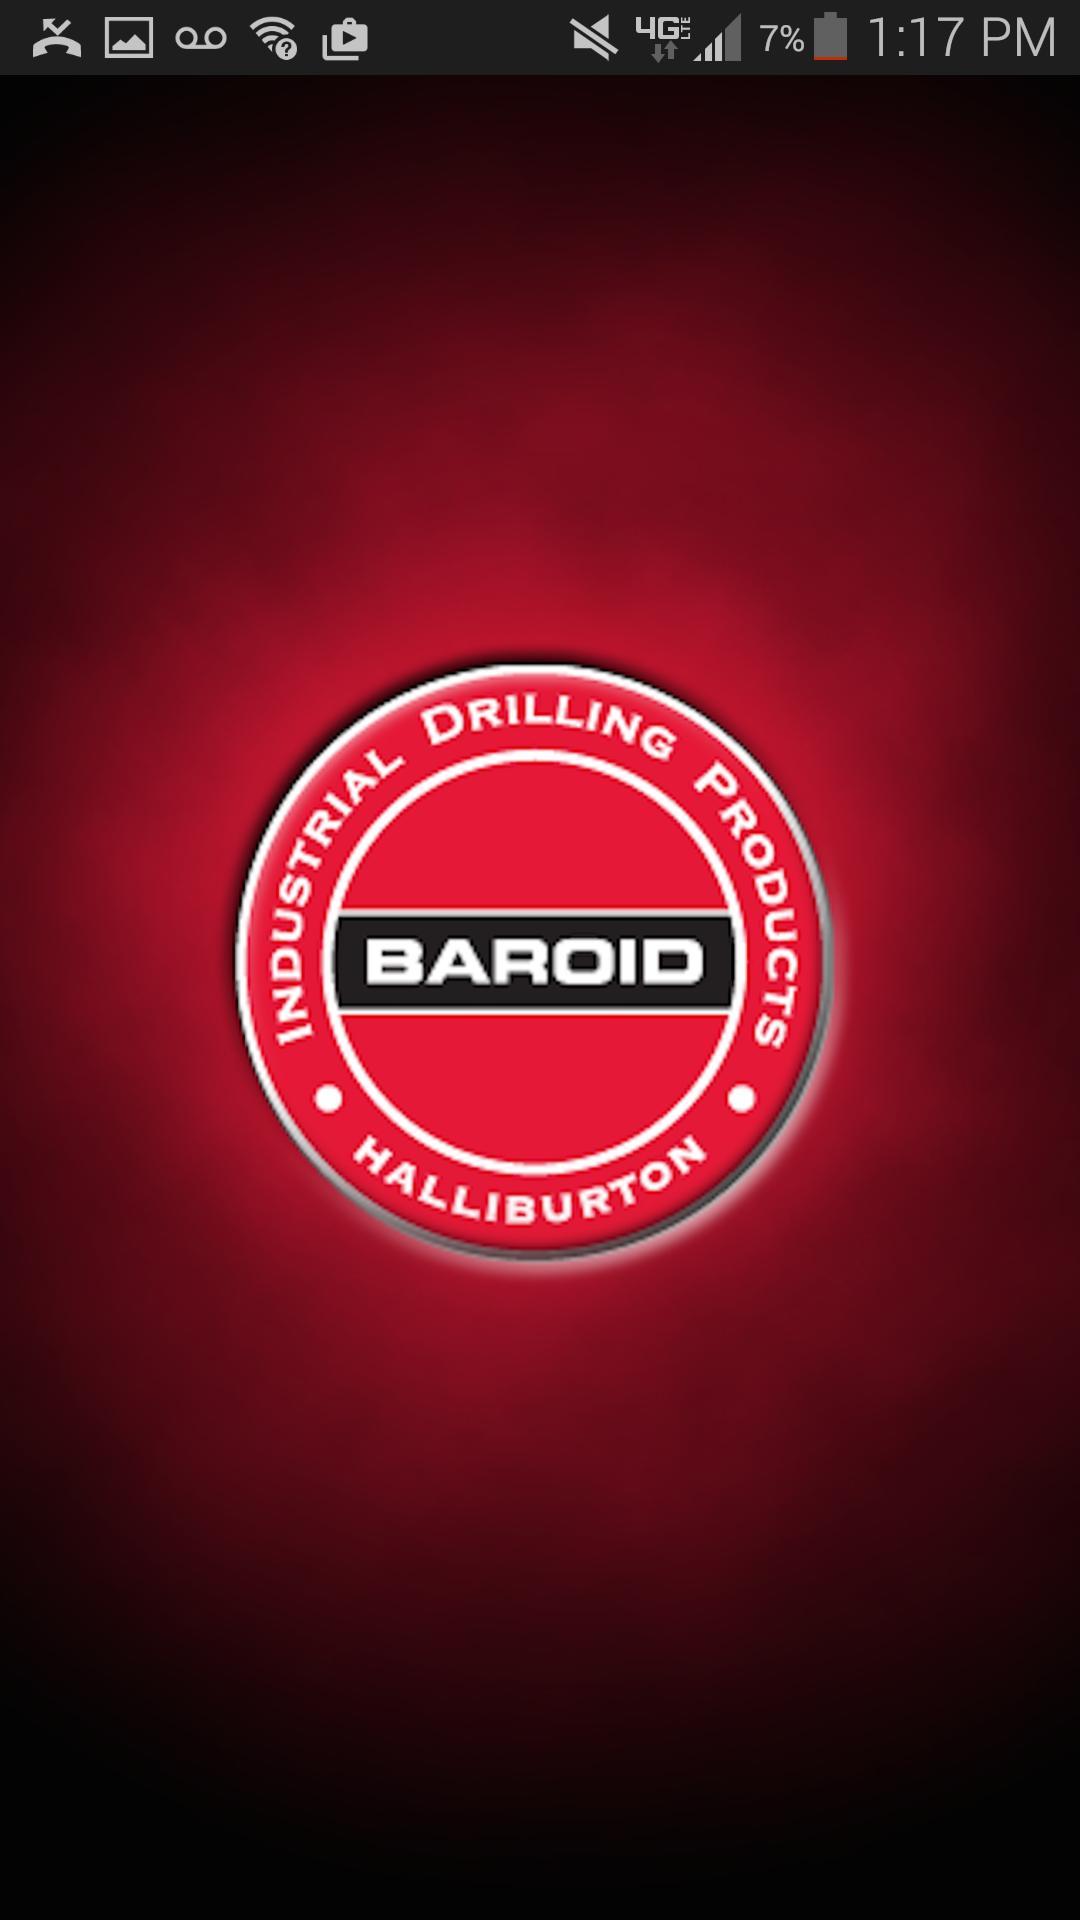 Baroid Logo - Baroid IDP for Android